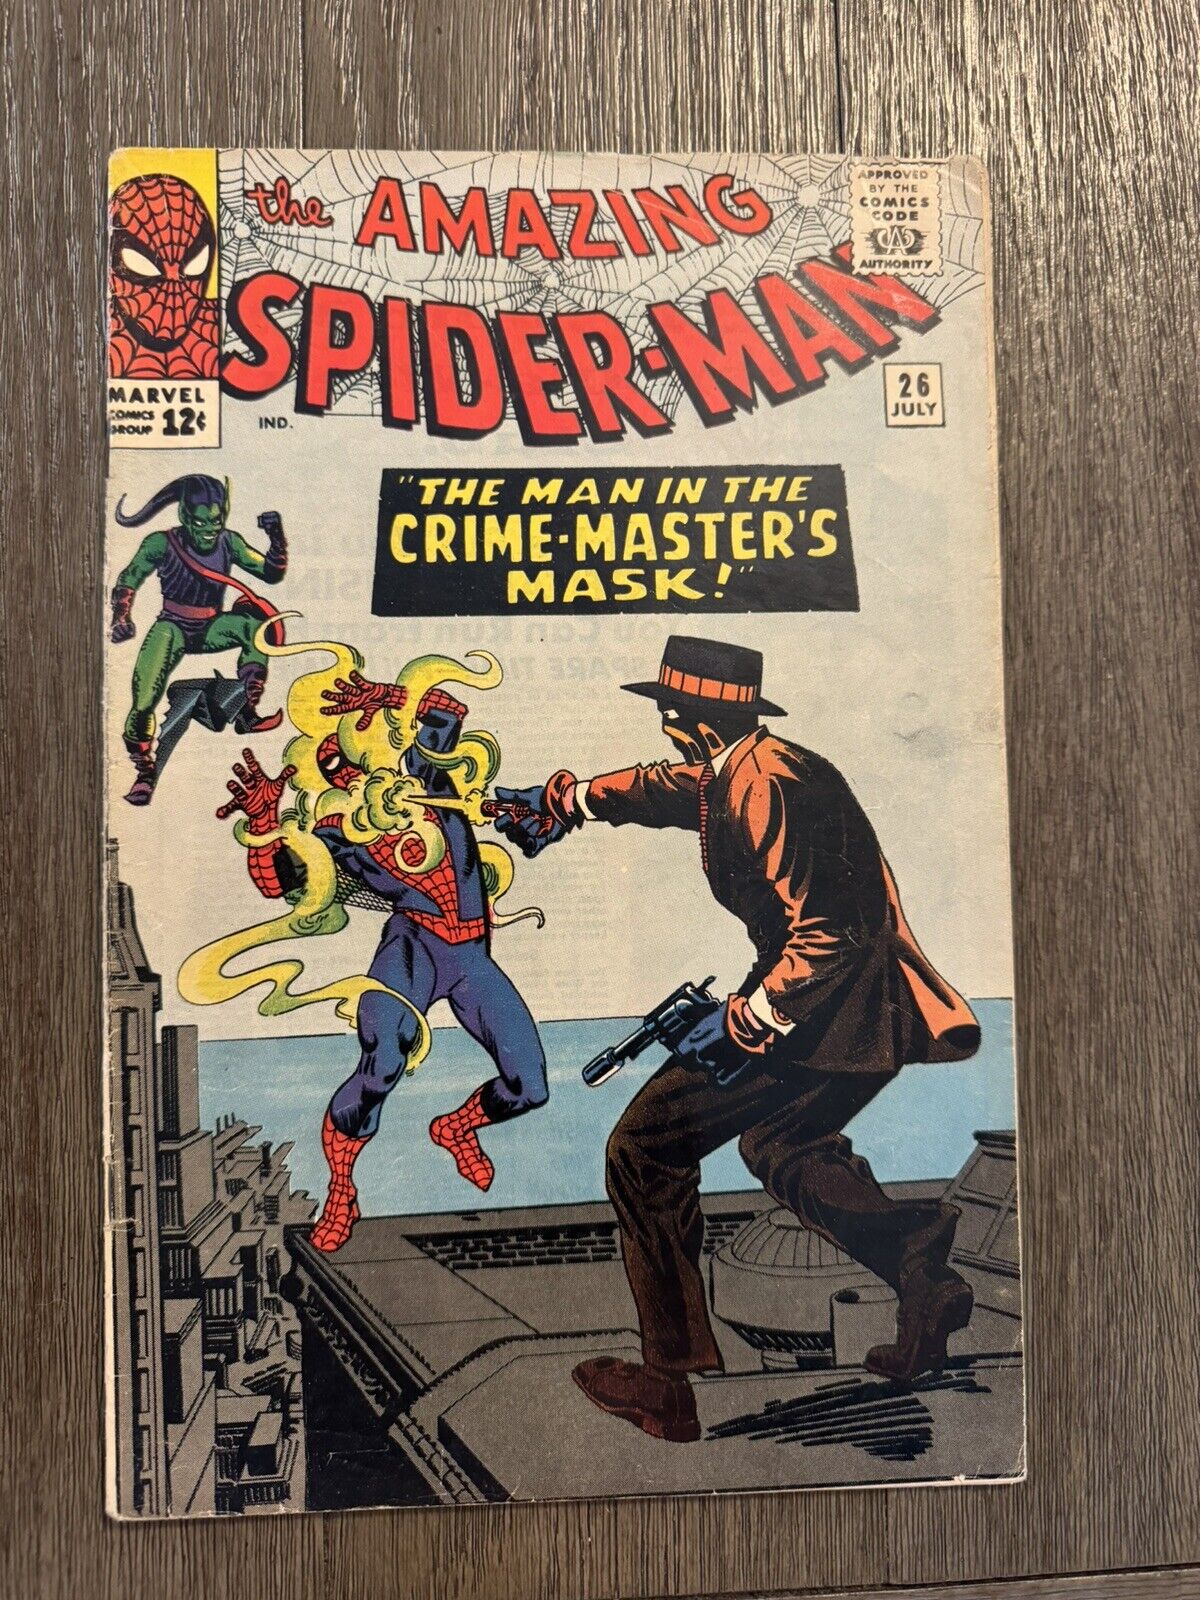 Amazing Spider-Man #26 VG (or better) Silver Age classic Marvel Comics 1965